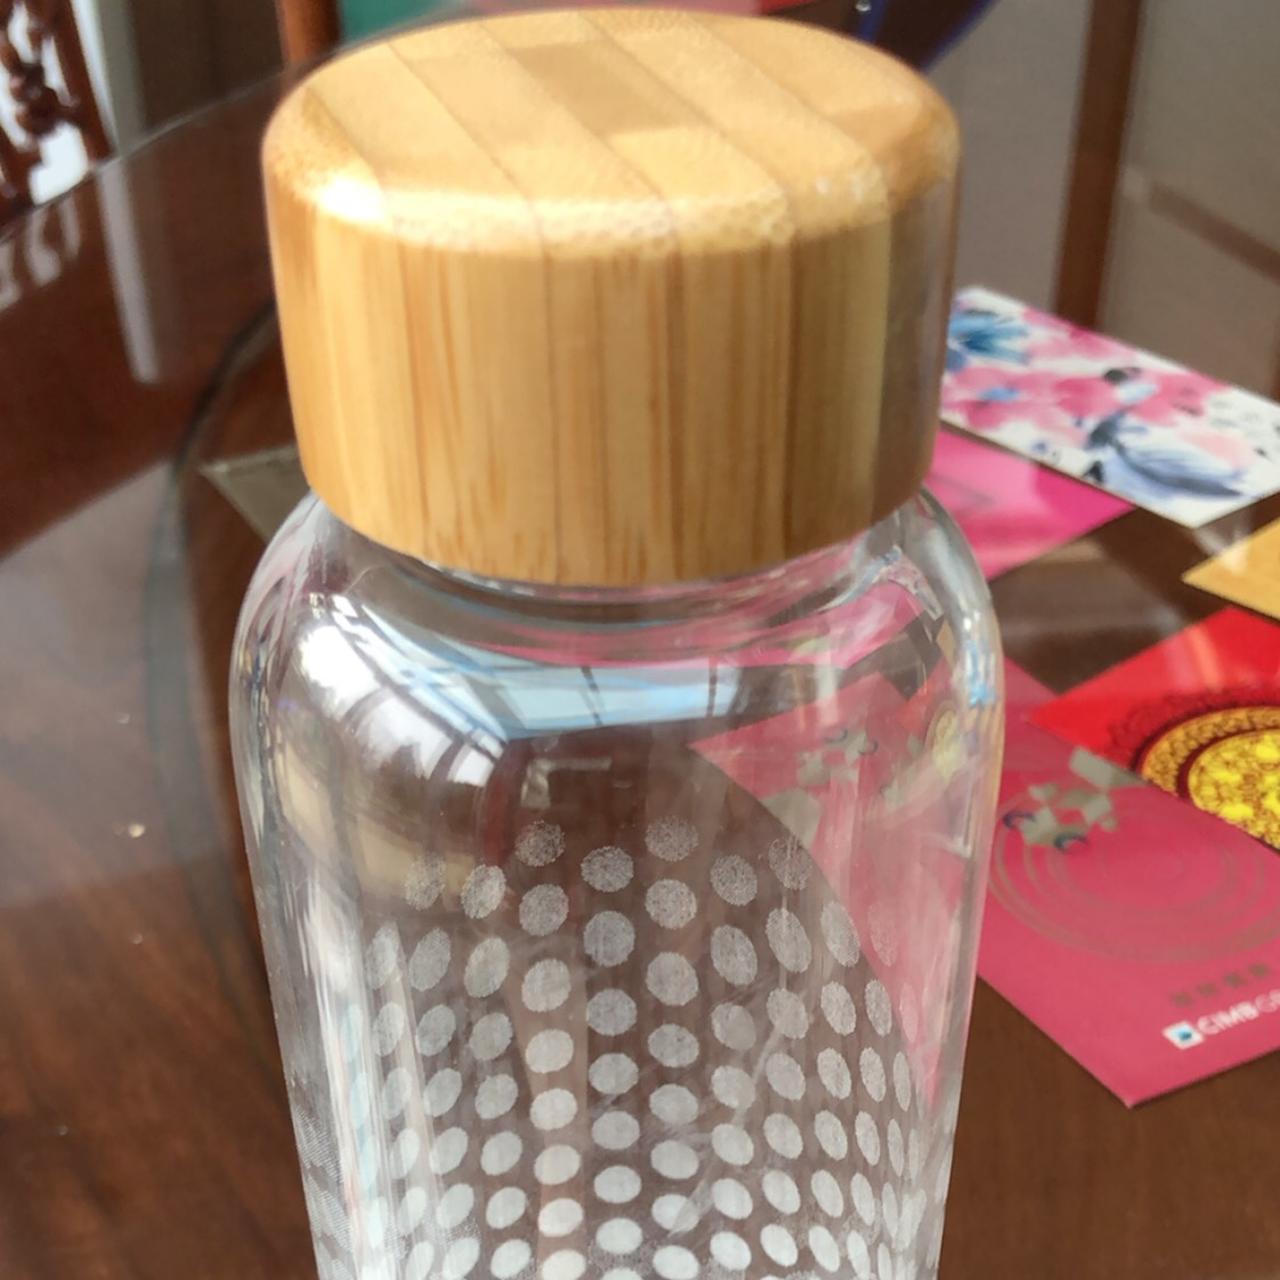 LOUIS VUITTON Comes in a 1oz glass roll on No - Depop